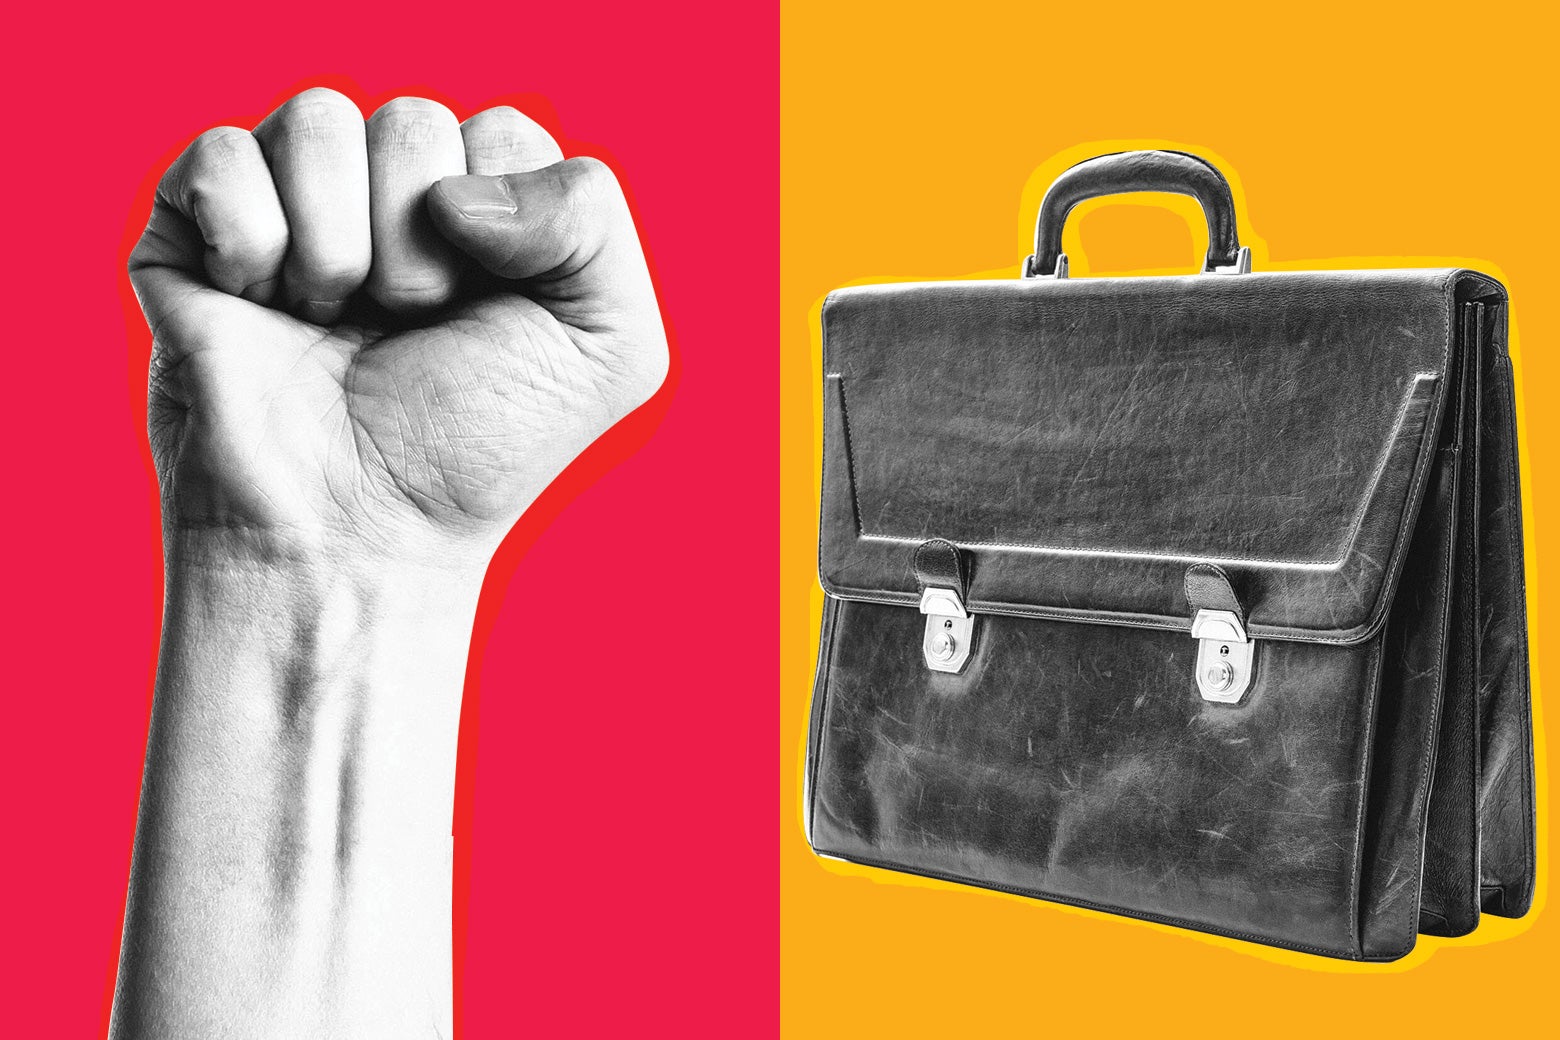 A fist thrust into the air on the left. A briefcase on the right.